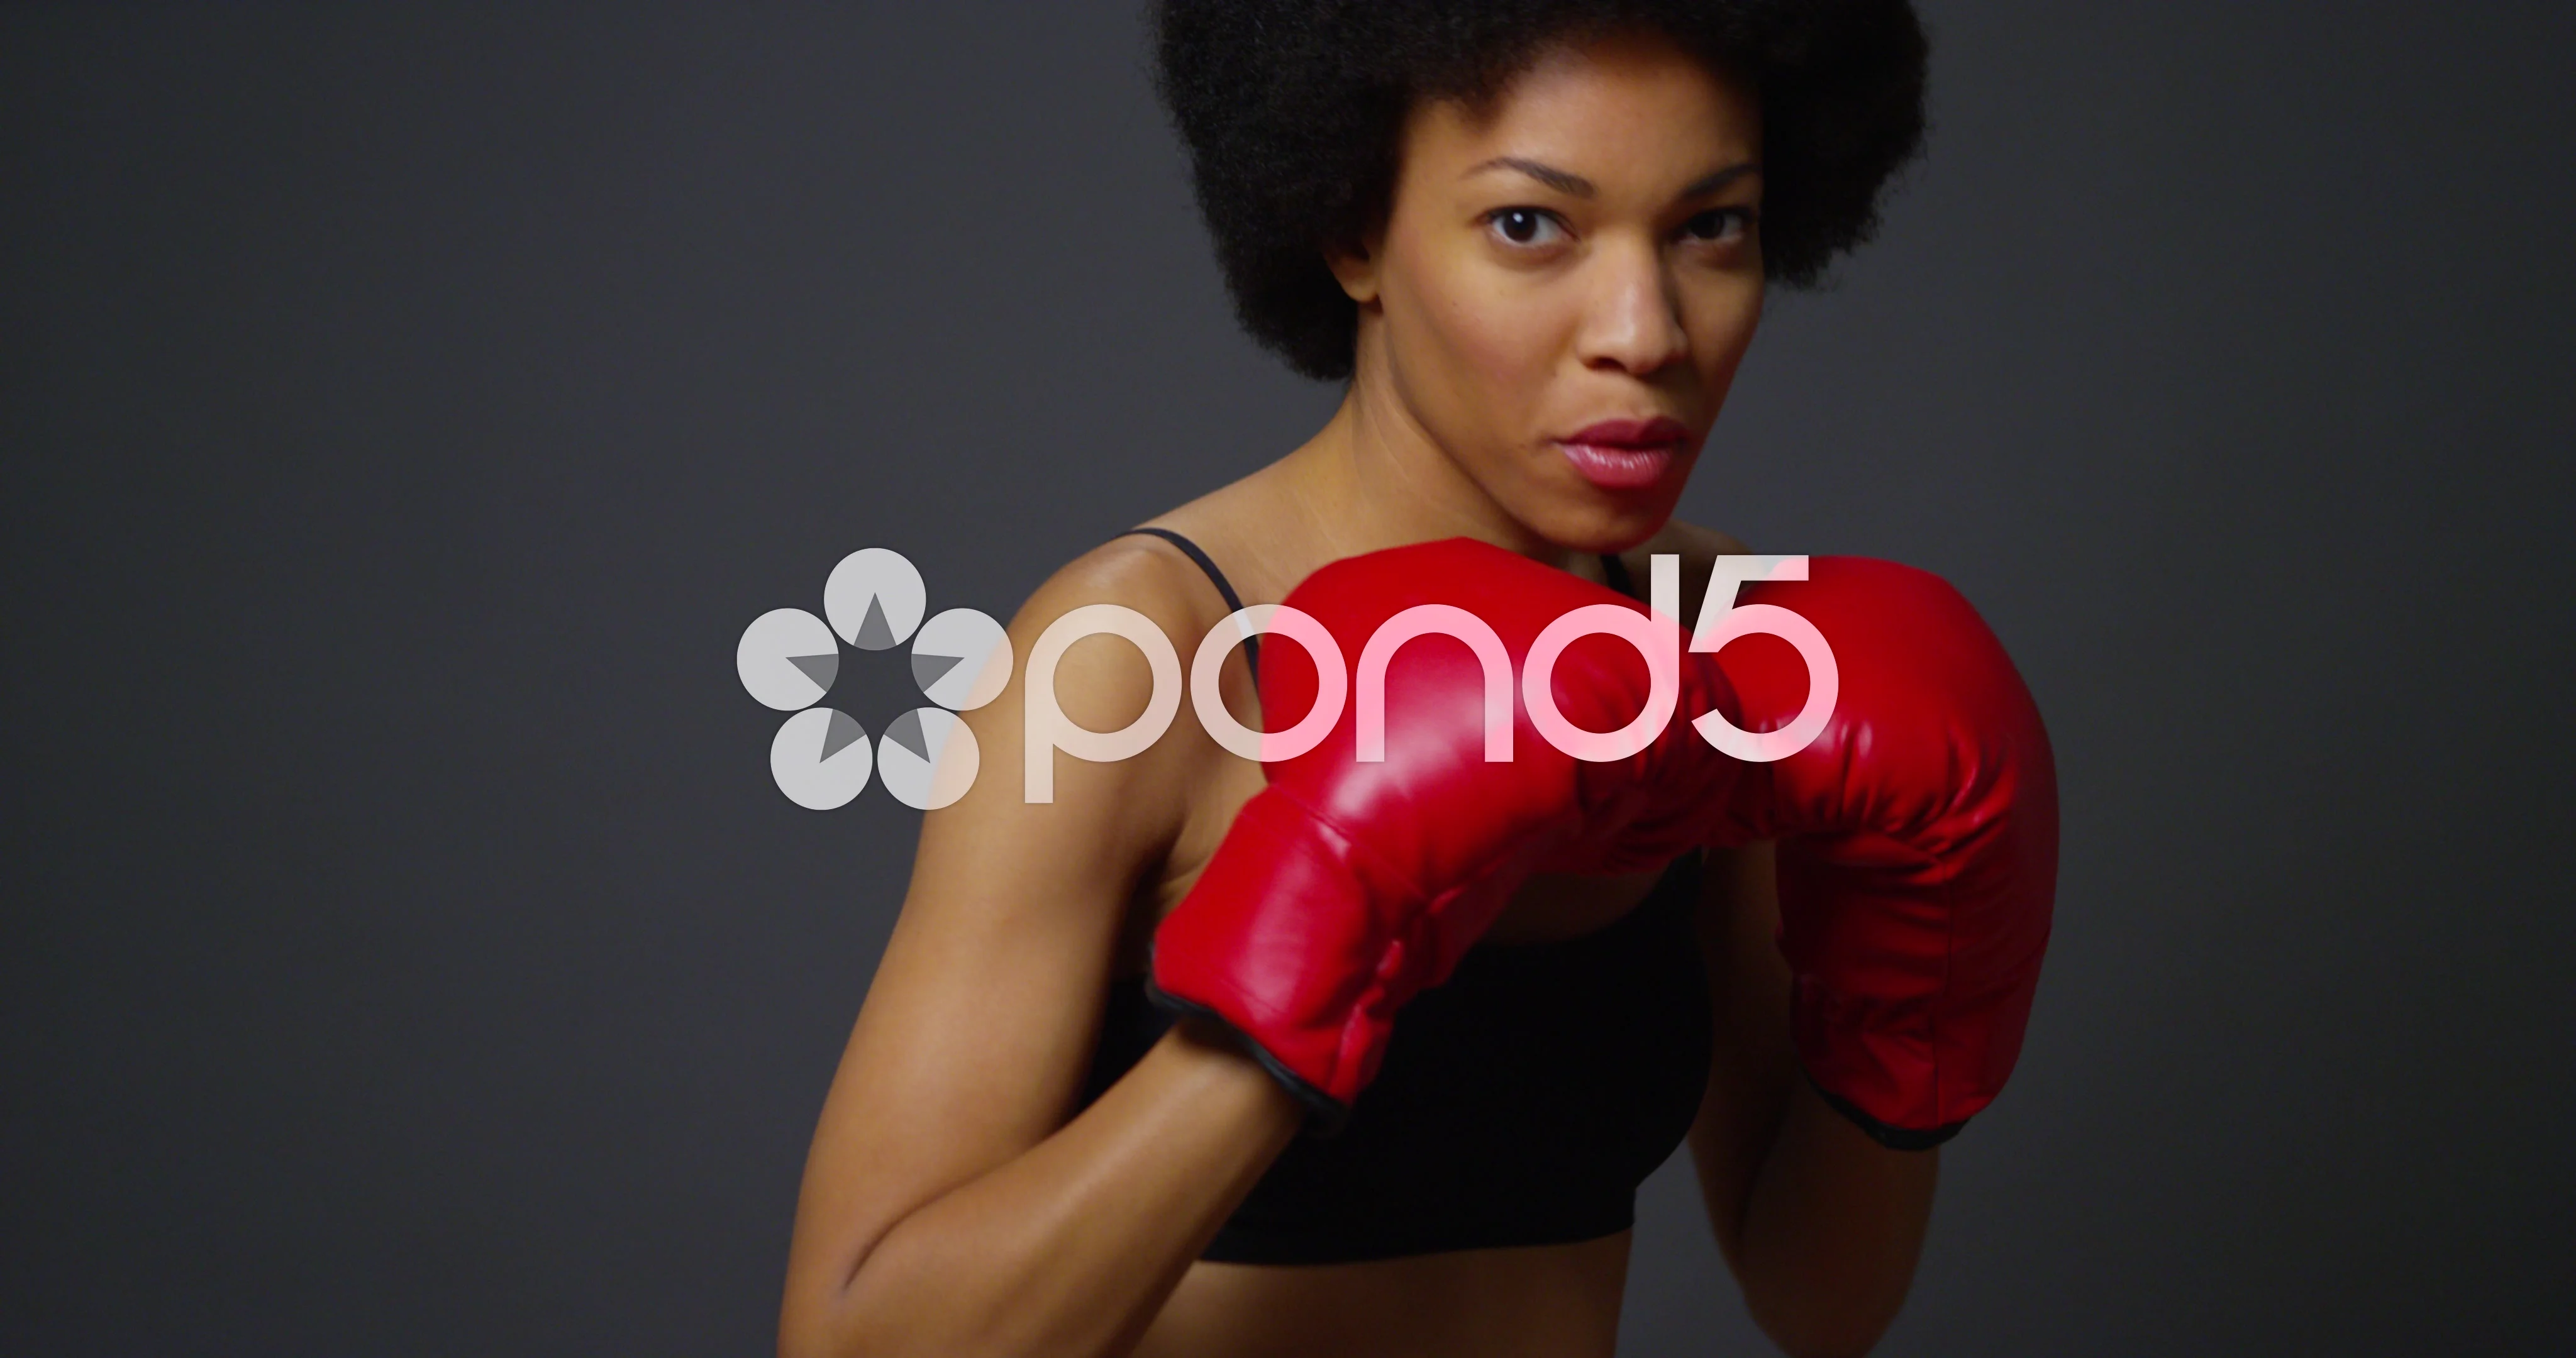 2,584 Black Women Boxing Stock Photos, High-Res Pictures, and